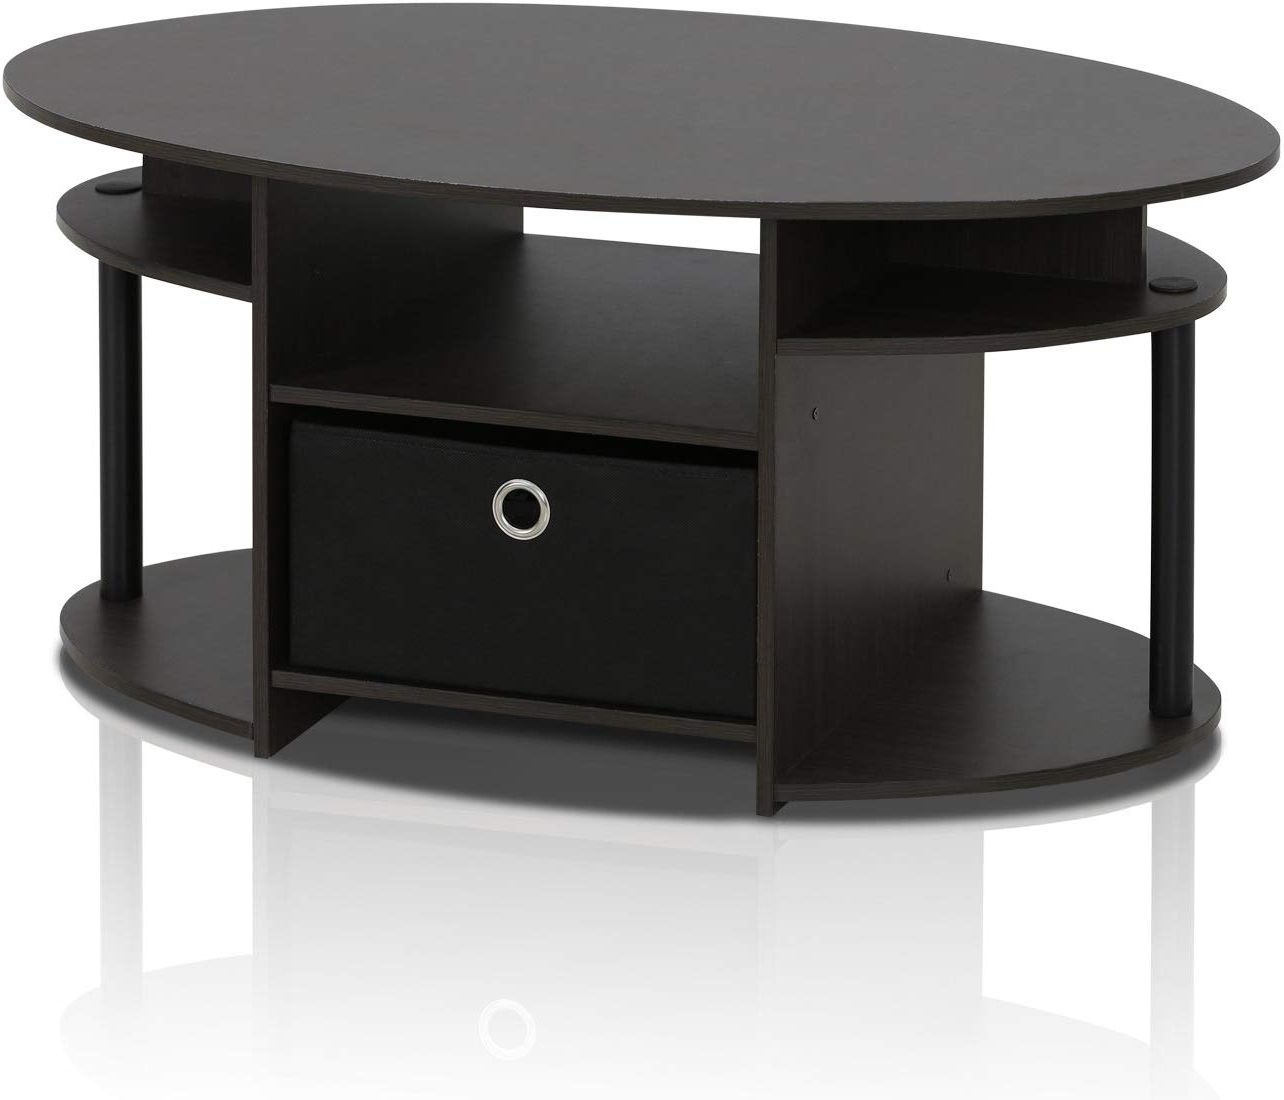 Black Coffee Table With Storage, Wood Look Accent In Most Up To Date Aged Black Coffee Tables (View 11 of 20)